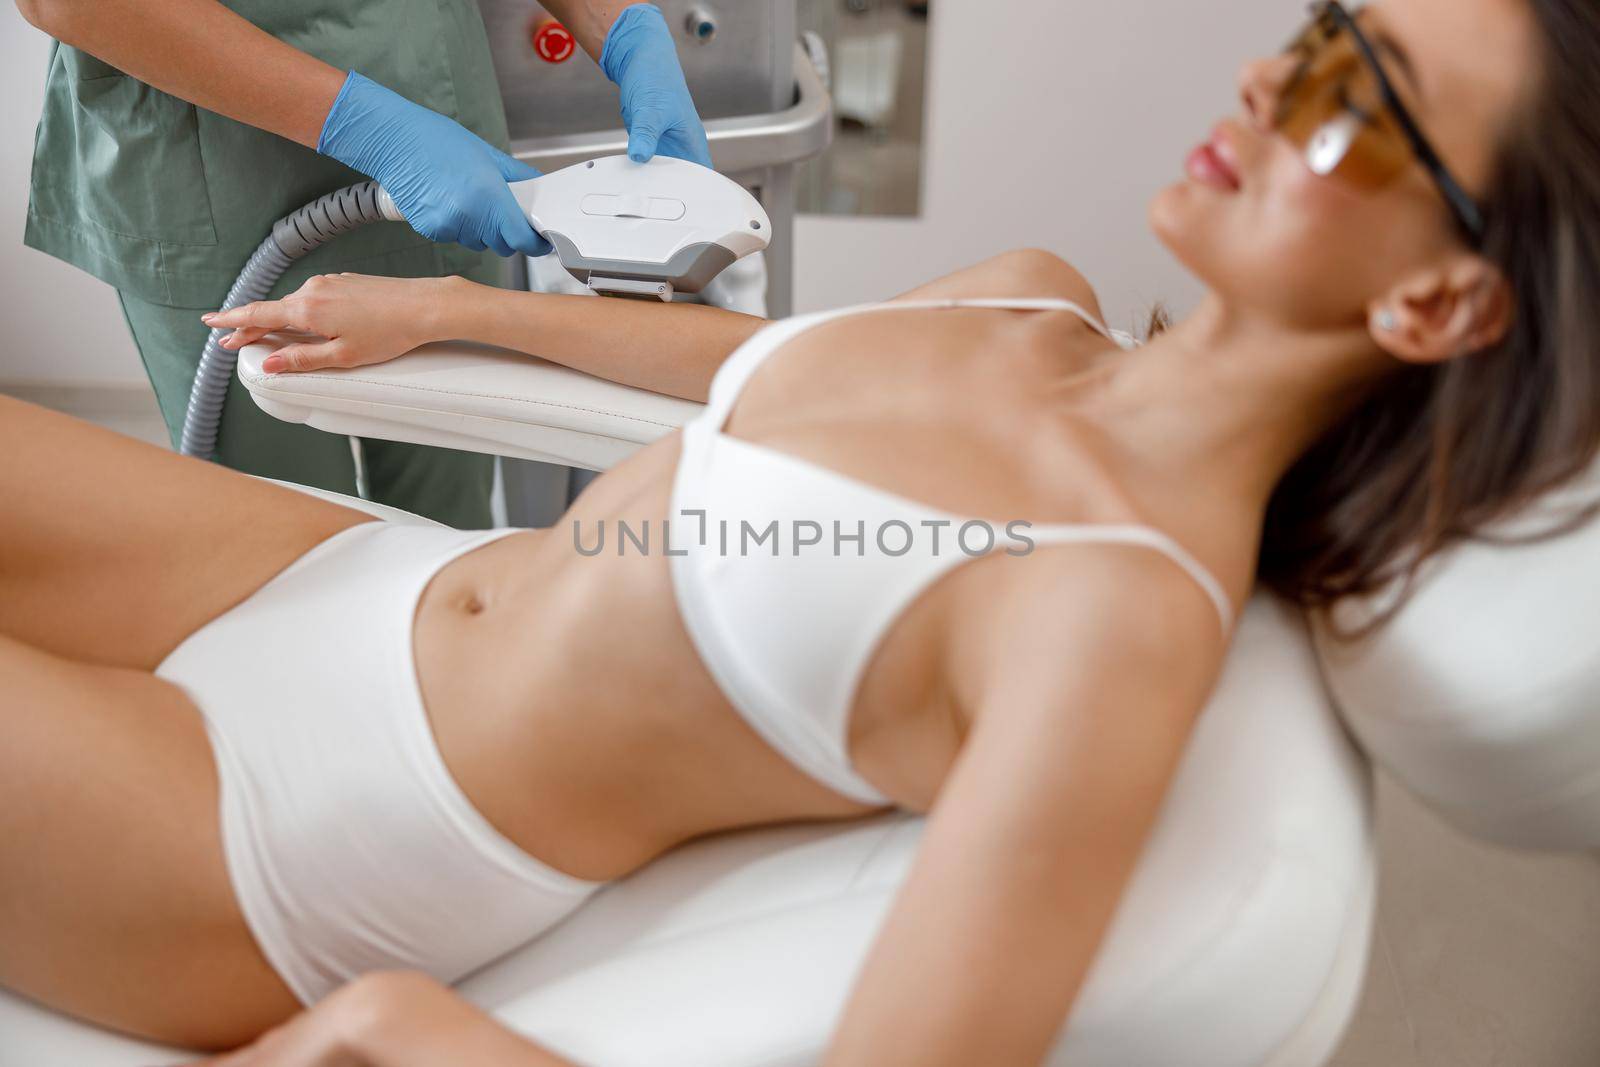 Arms hair removal procedure with ipl machine from a professional cosmetologist in beauty salon by Yaroslav_astakhov